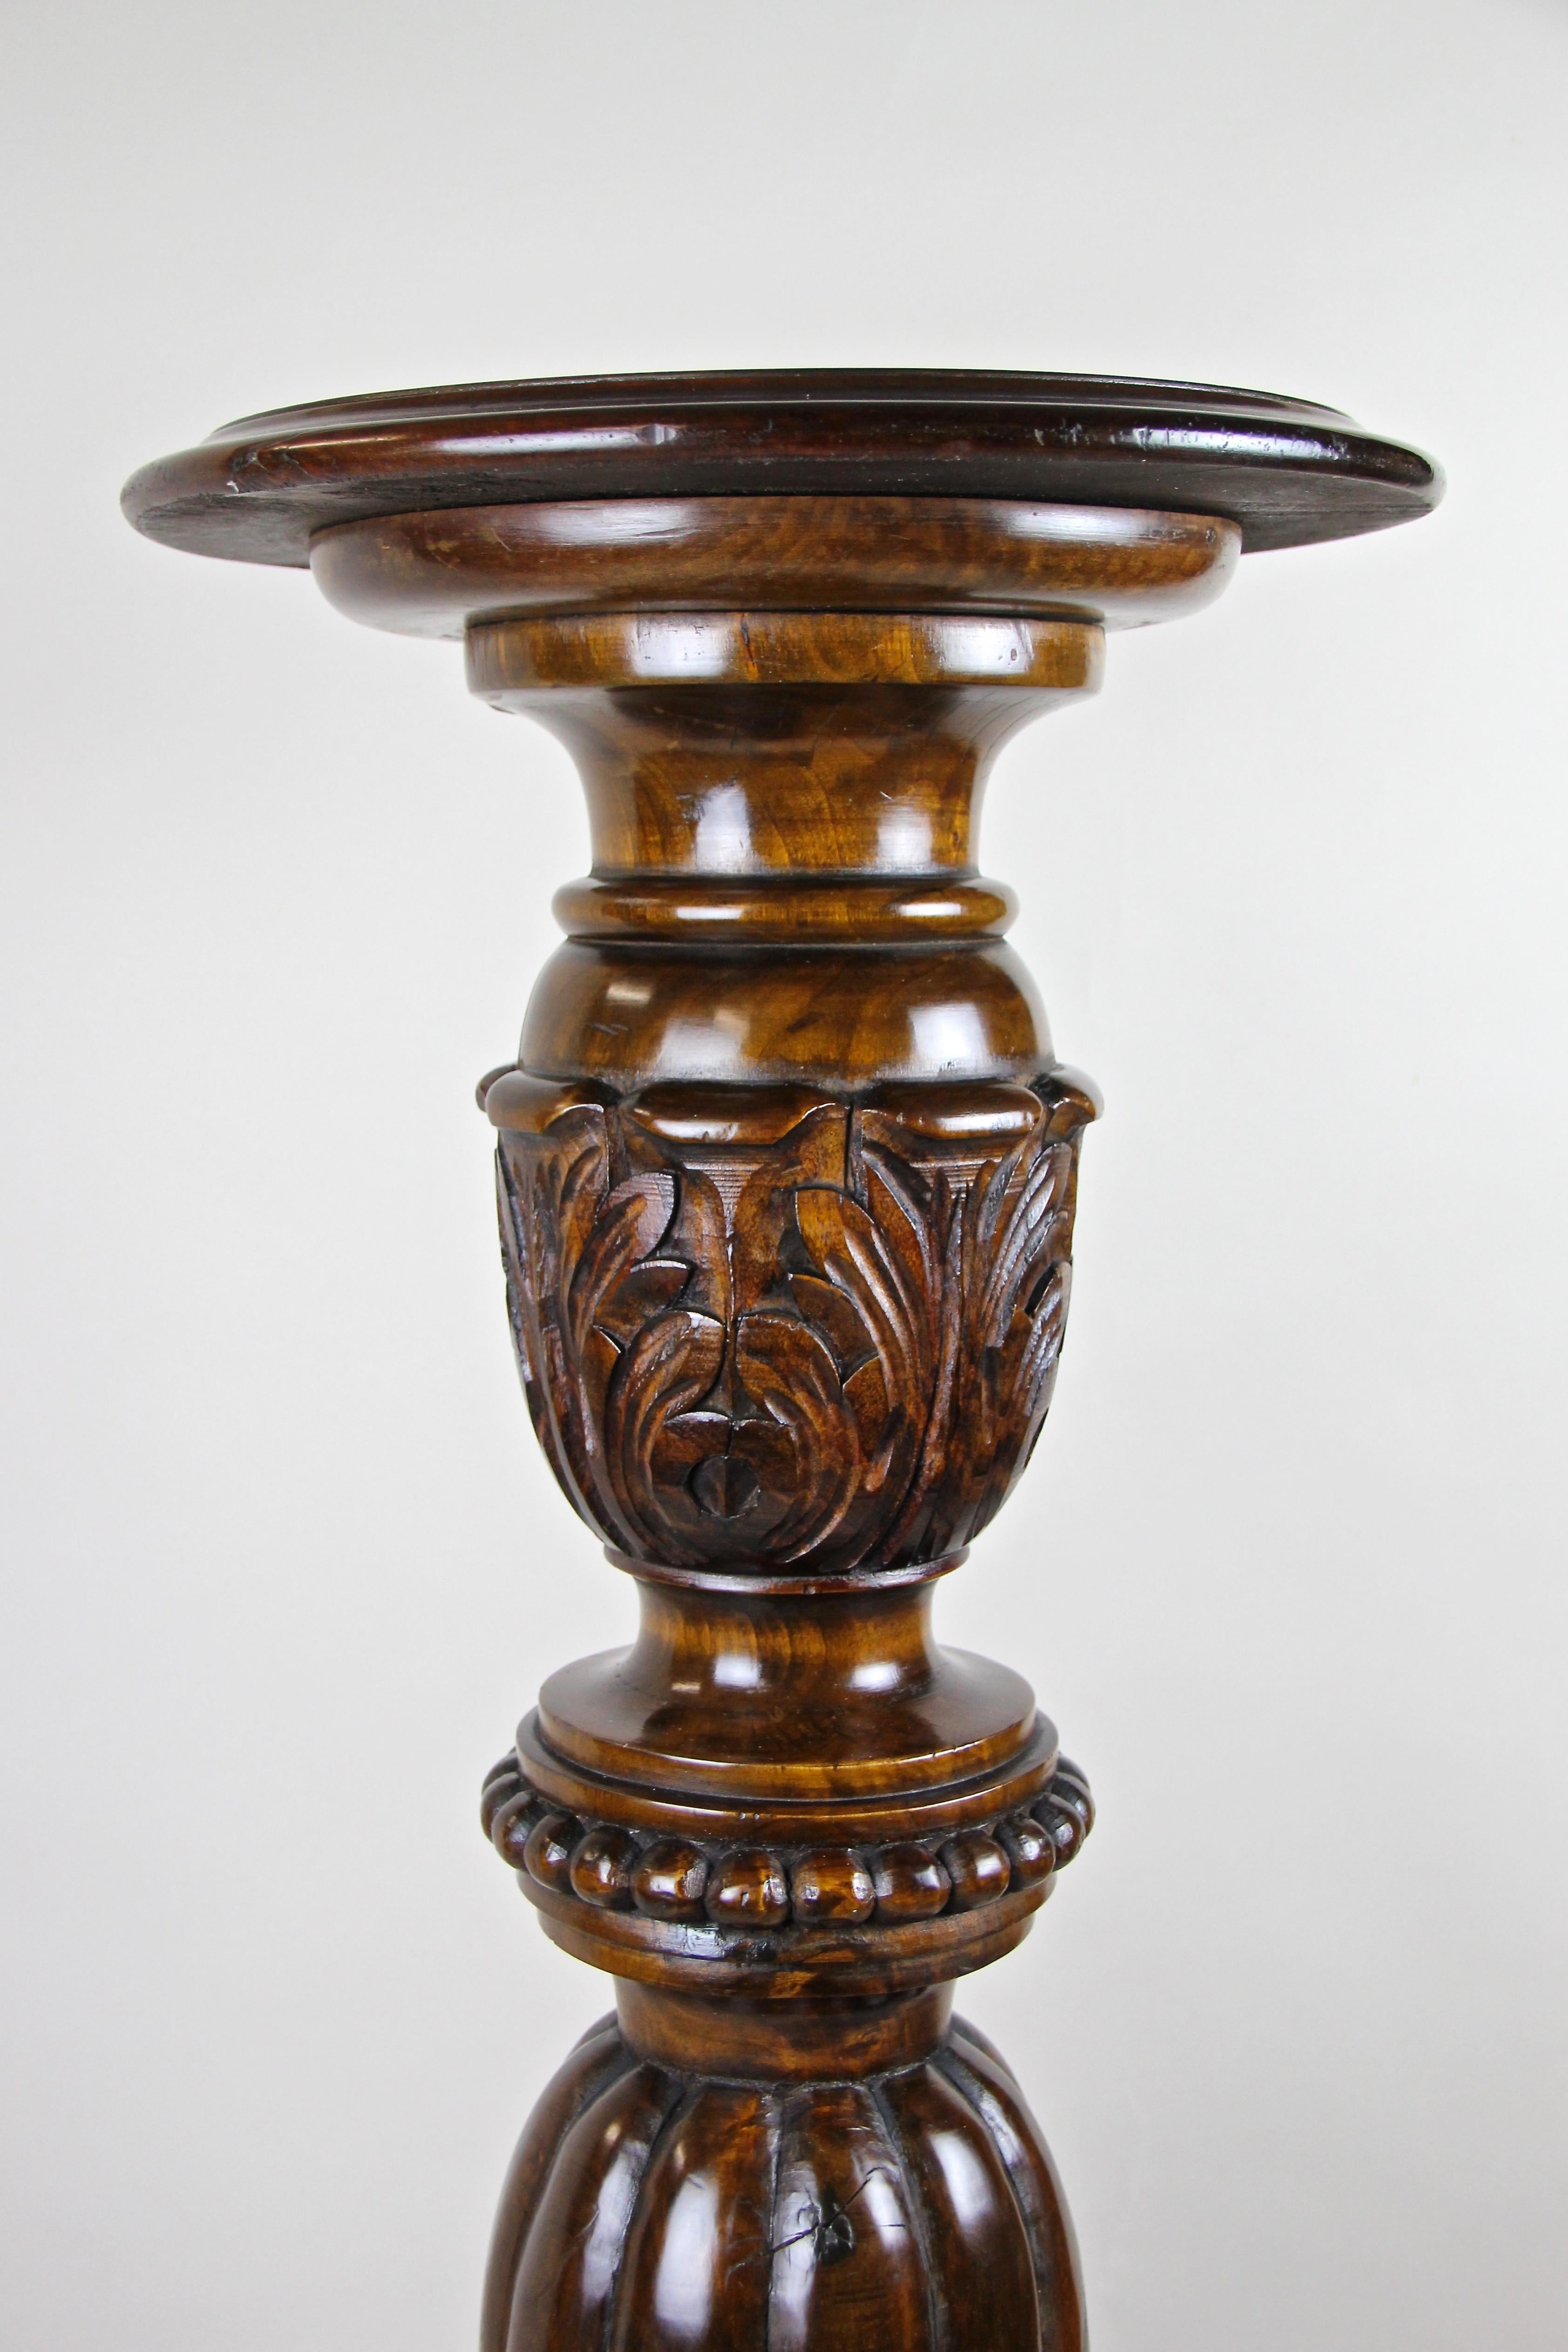 Gorgeous nut wood pedestal from Hungary, circa 1870 with a classy design. Elaborately hand-carved out of solid nut wood, this beautiful piece comes with a very appealing base standing on three lion paws. The fantastic bulbous shaped column runs into